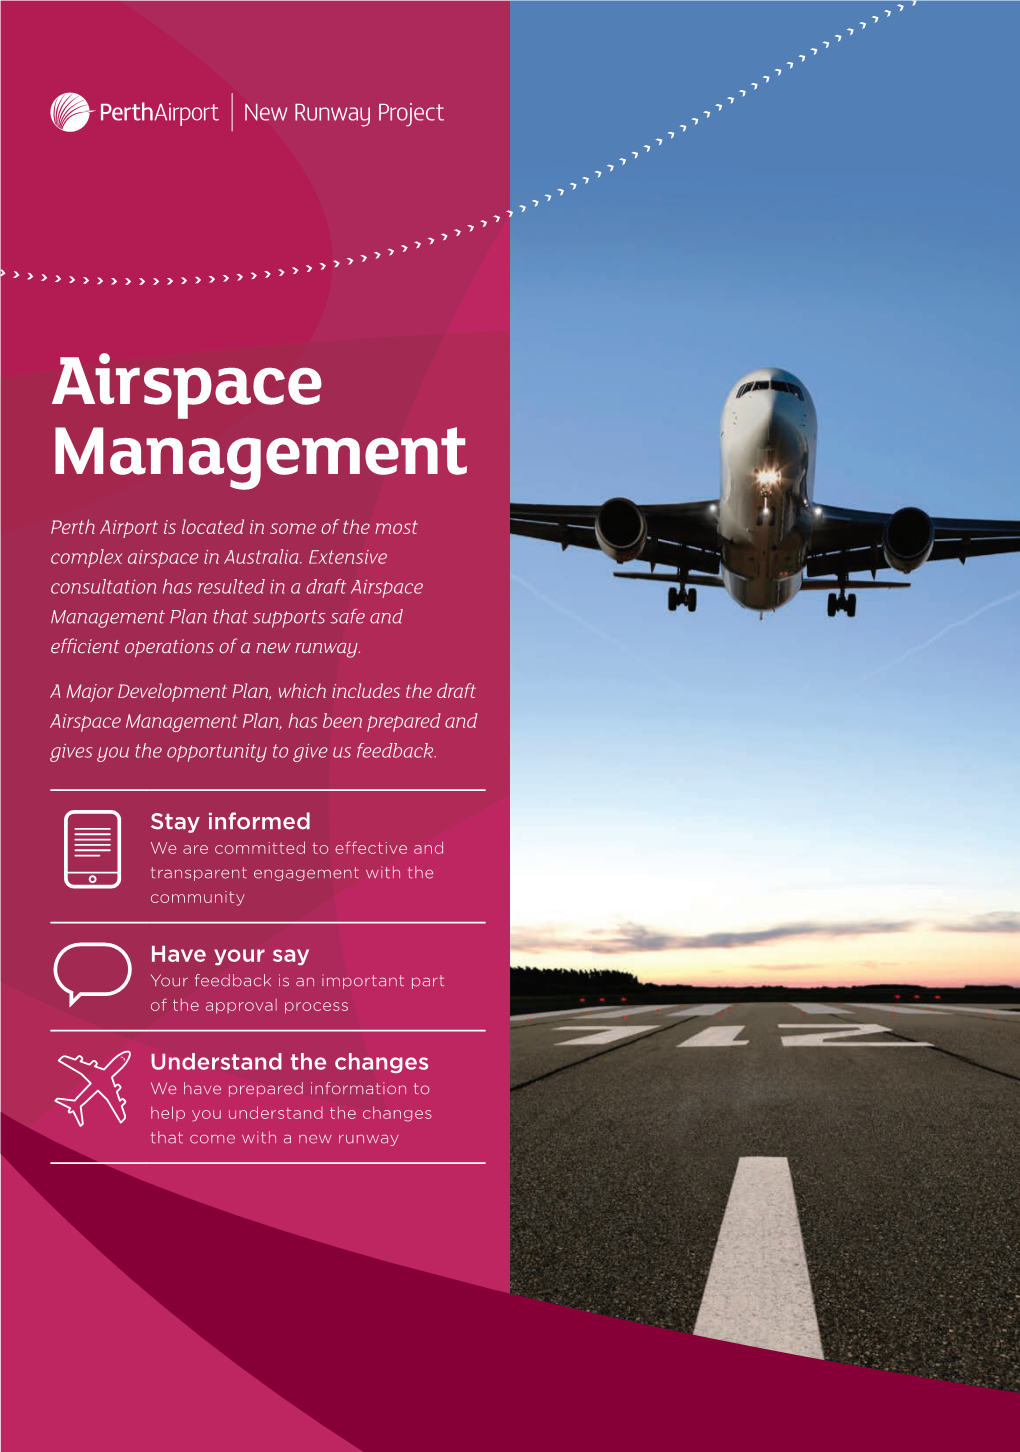 Airspace Management